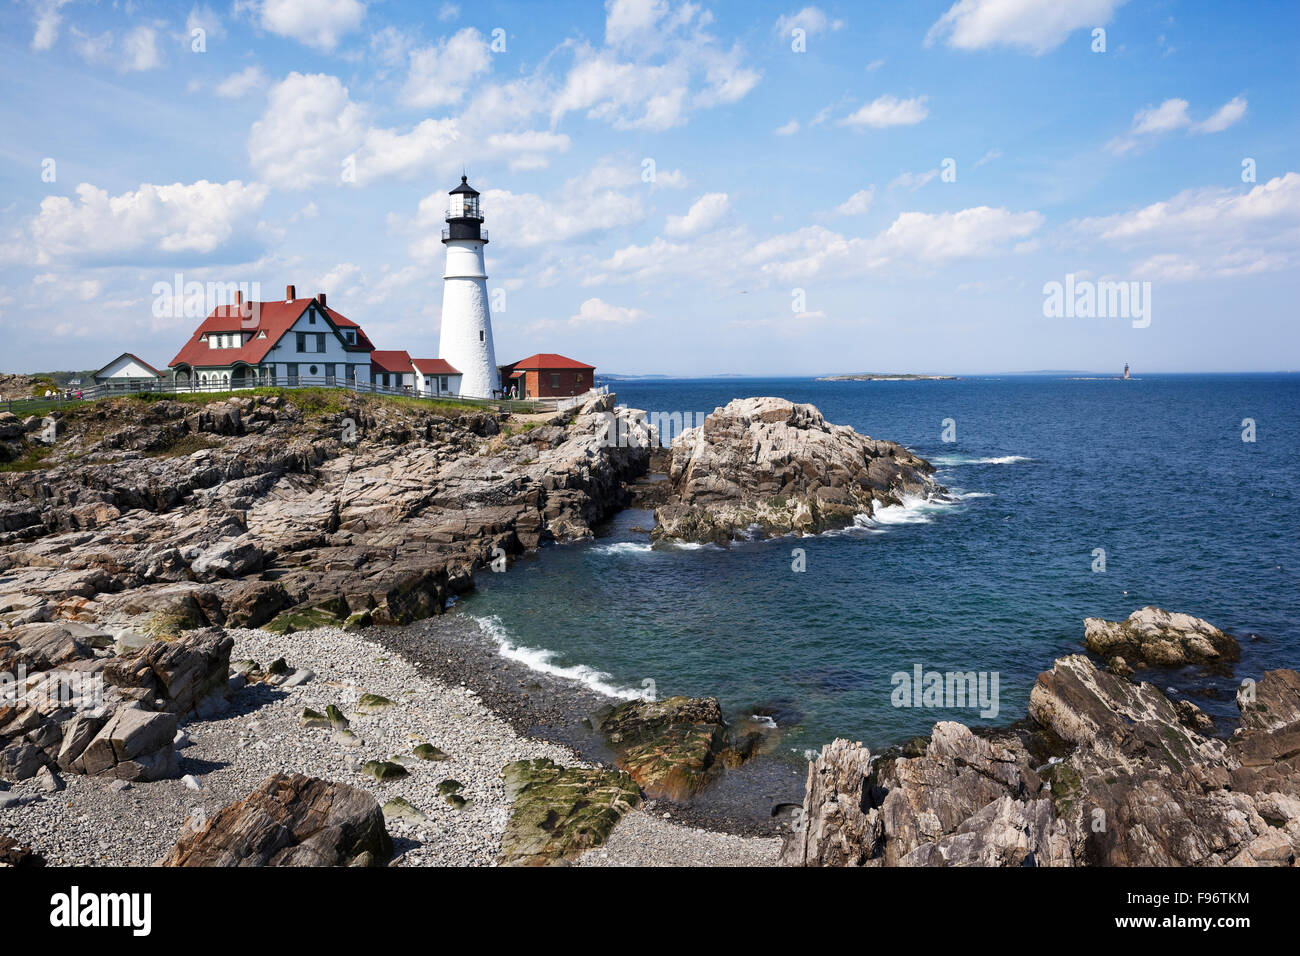 Completed in 1791, Portland Head Light is the oldest lighthouse in Maine and is located in Cape Elizabeth, at the entrance to Stock Photo